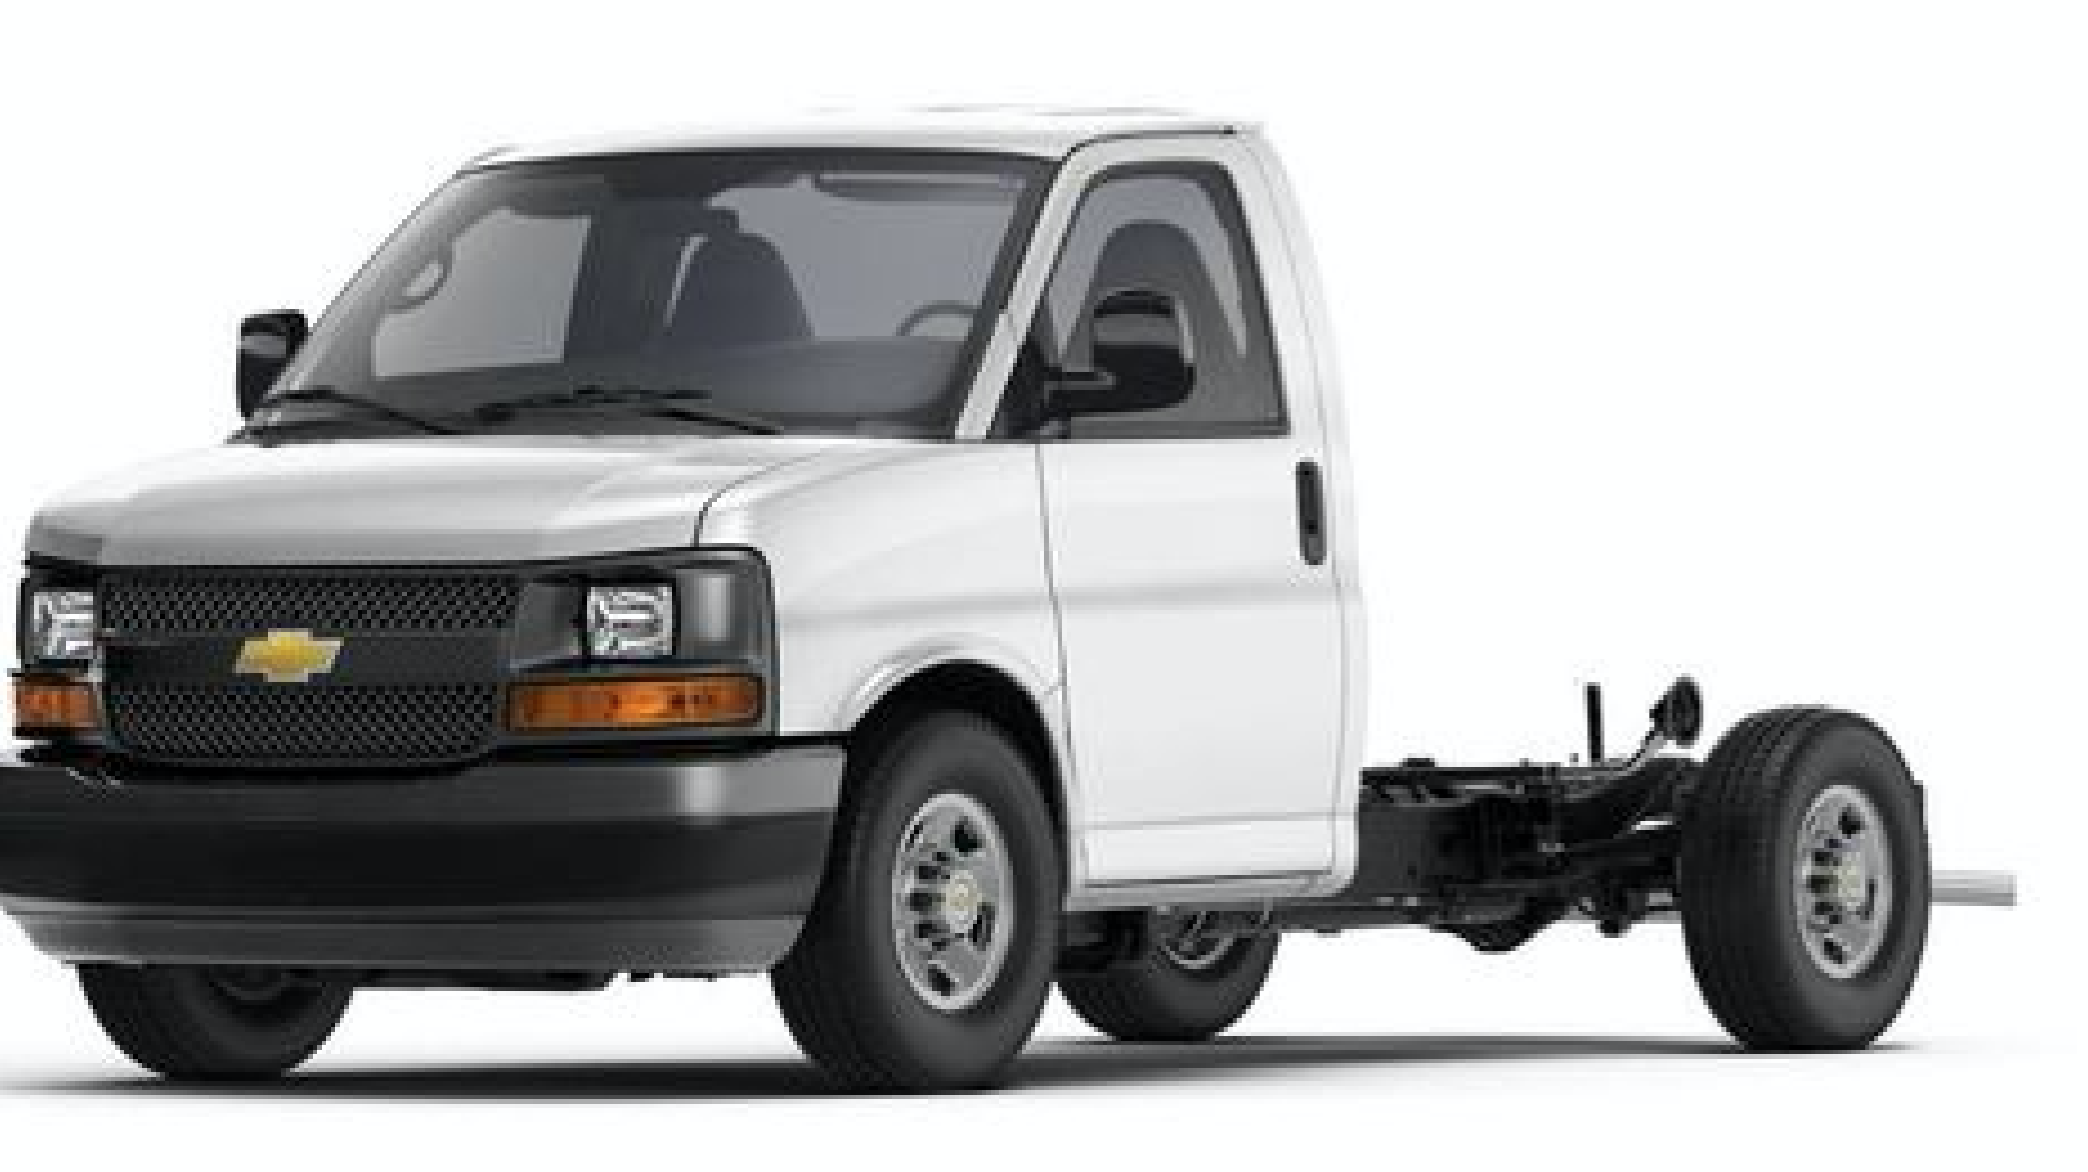 Navistar to integrate eFlex System's Flexible Assembly Technology into its Springfield Plant for the production of GM vans